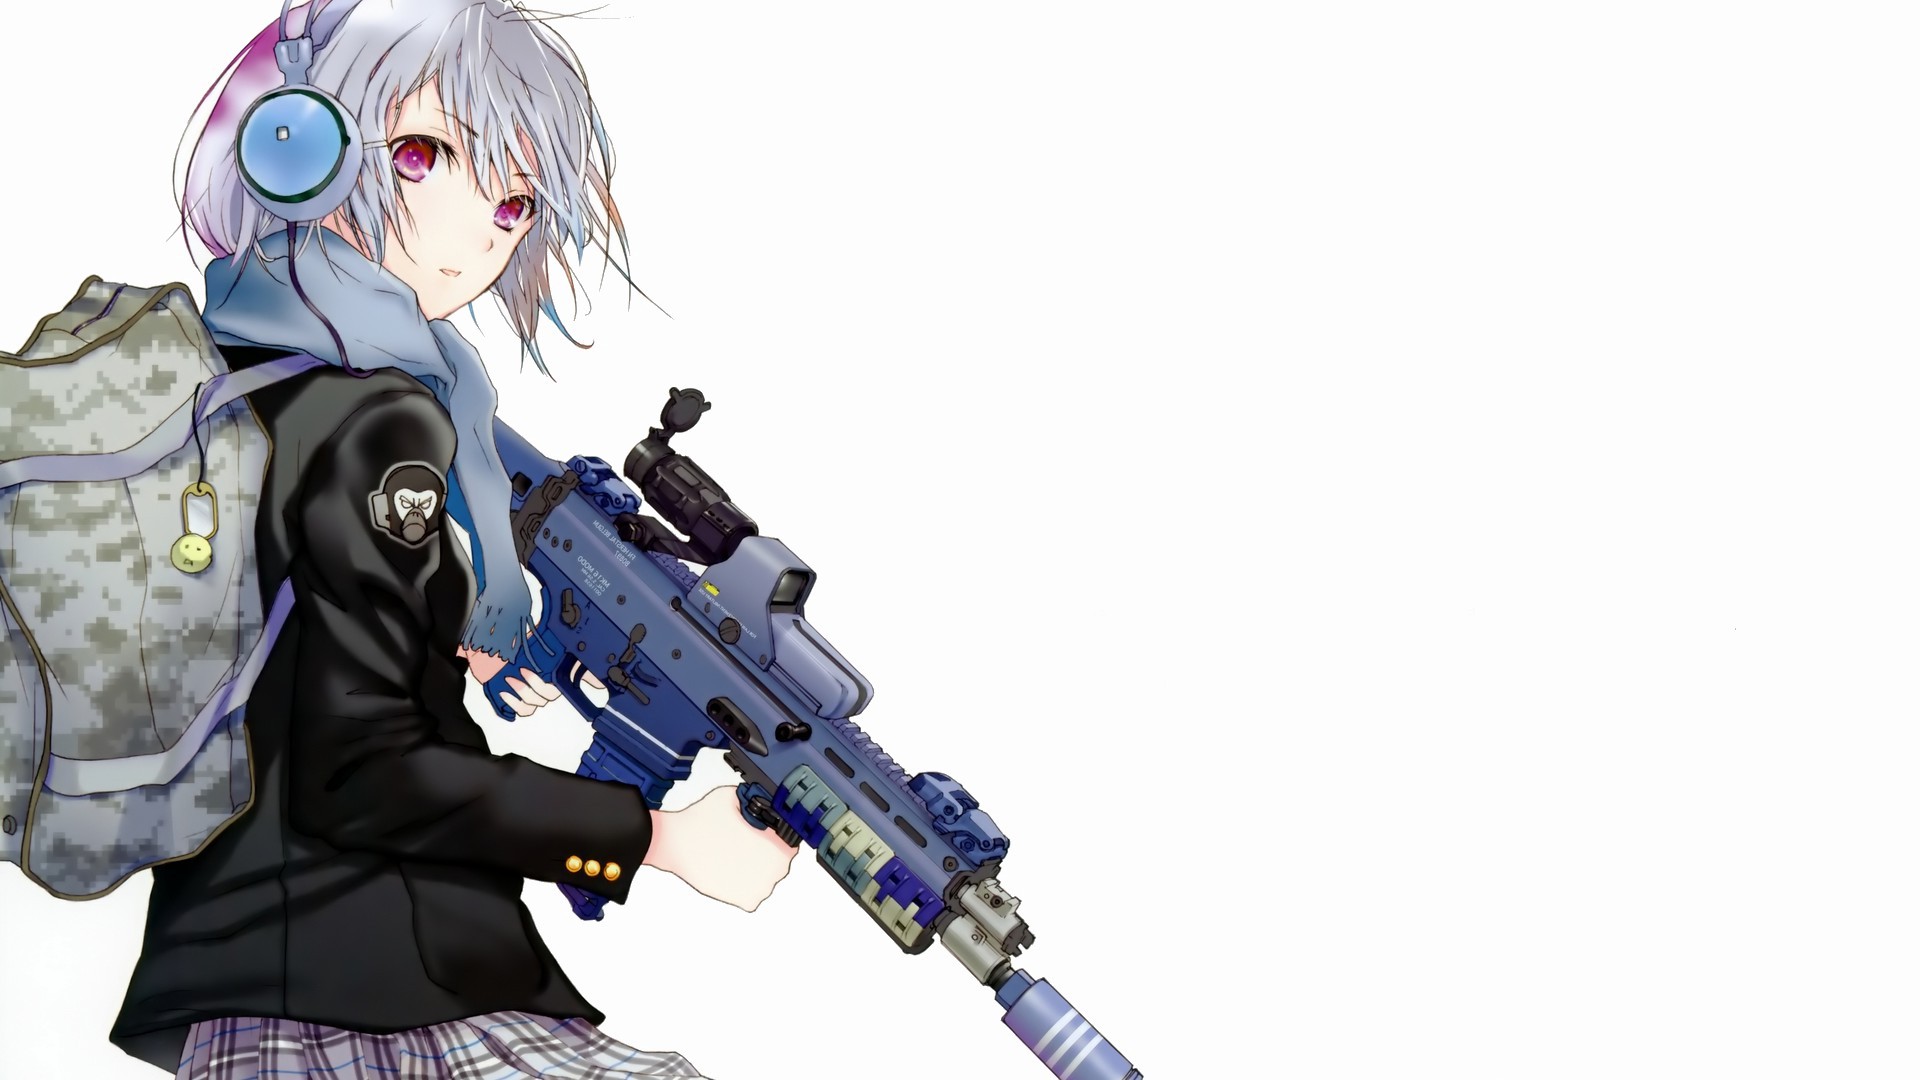 anime, Military, Headphones, Backpacks, School Uniform, White Hair, Scopes, Scarf, Simple Background, White Background, Weapon, Suppressors, Jacket, Purple Eyes, Red Eyes, Original Characters, Anime Girls, SCAR Wallpaper